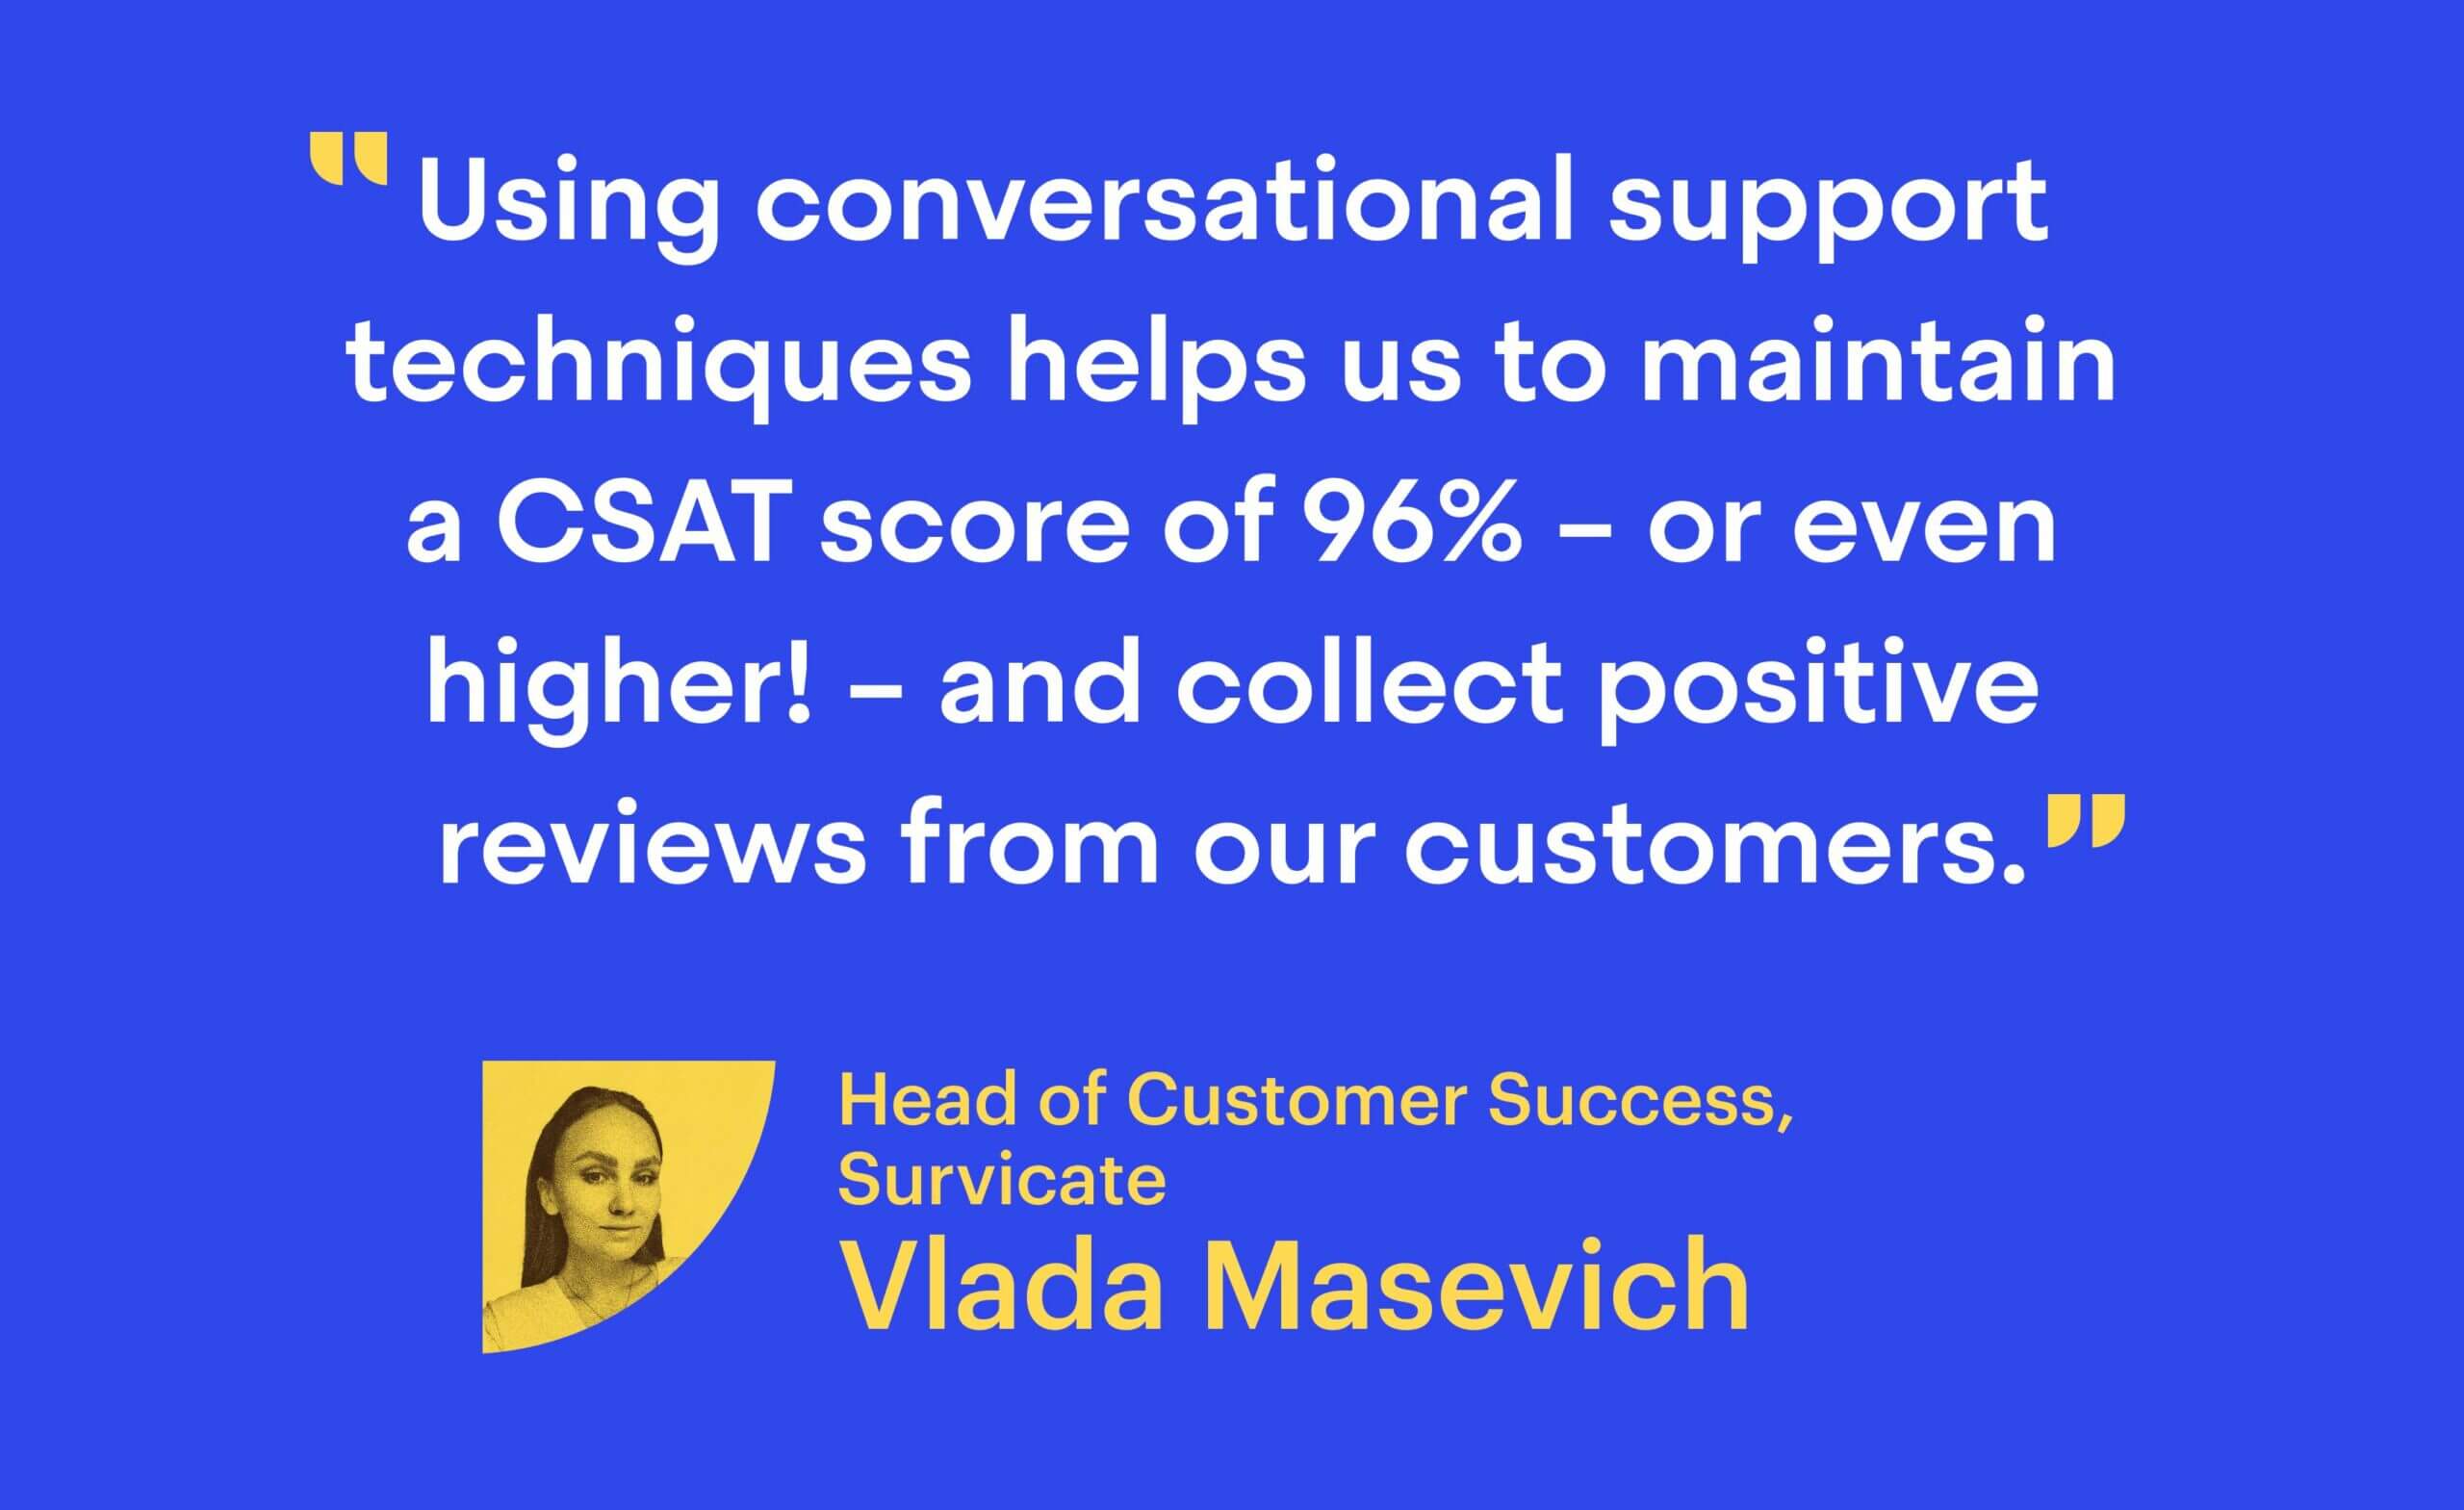 “Using conversational support techniques helps us to maintain a CSAT score of 96% – or even higher! – and collect positive reviews from our customers.” Vlada Masevich, Head of Customer Success at Survicate